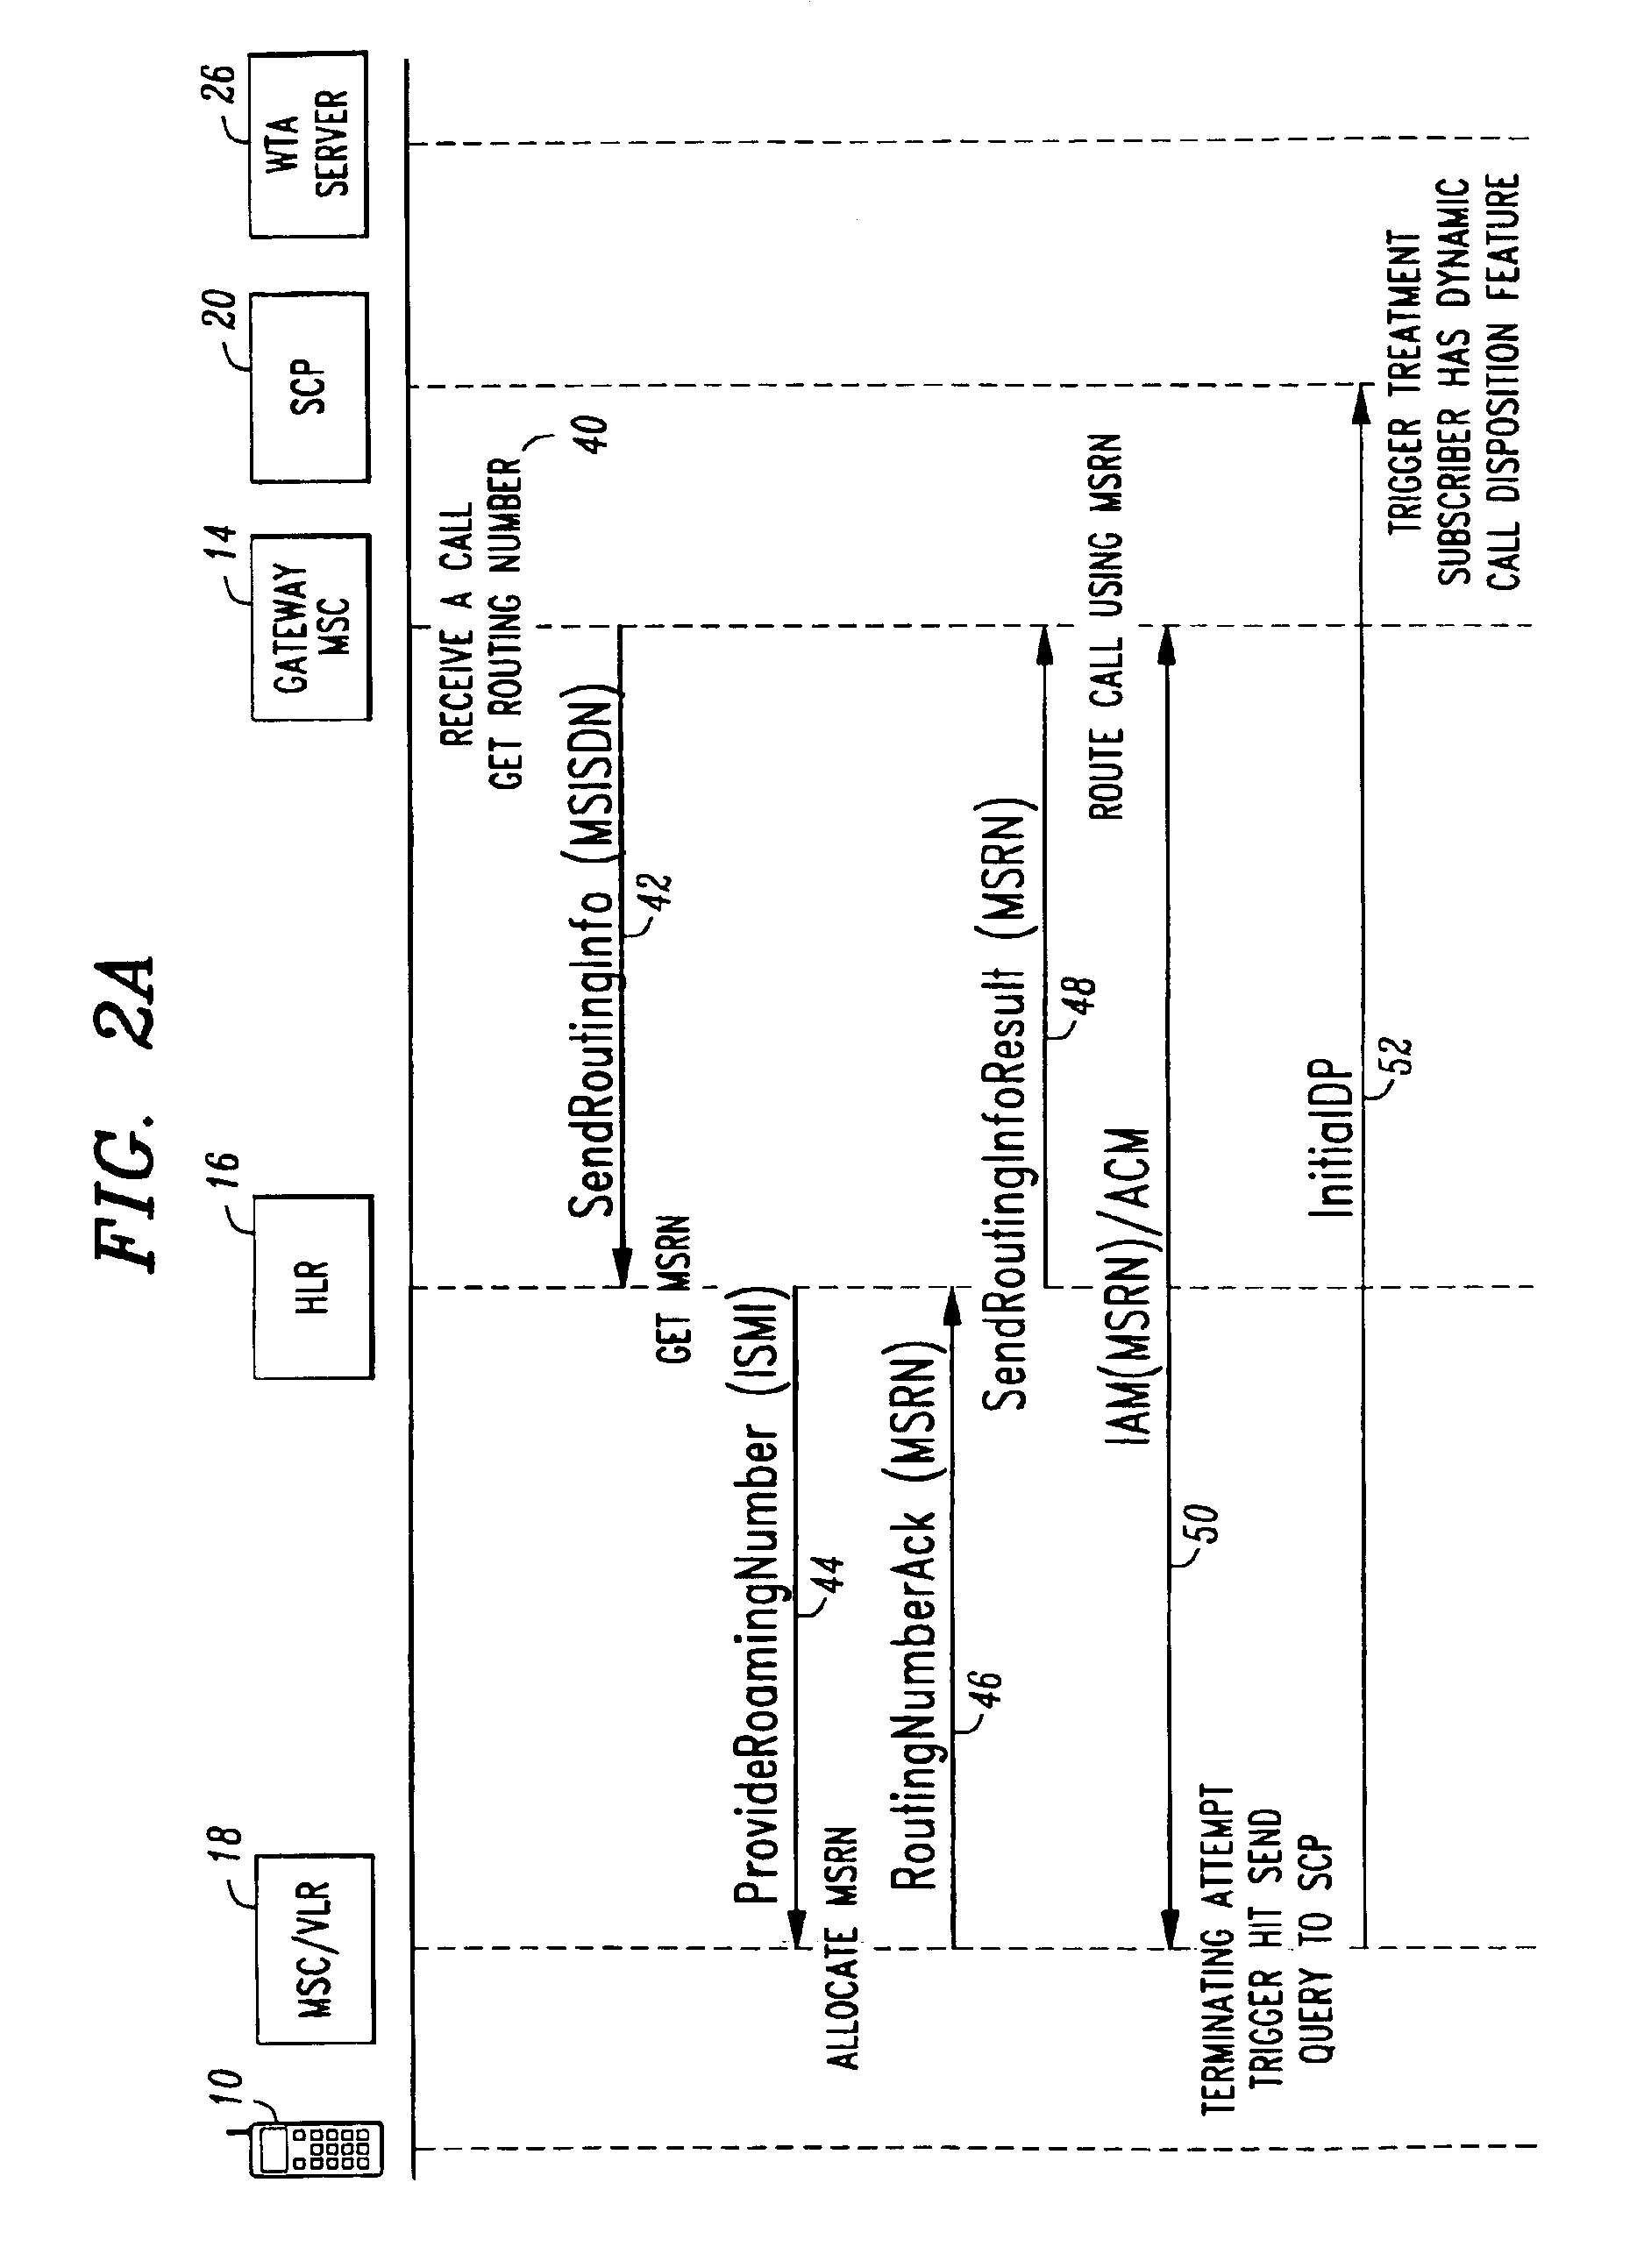 System and method for providing dynamic call disposition service to wireless terminals